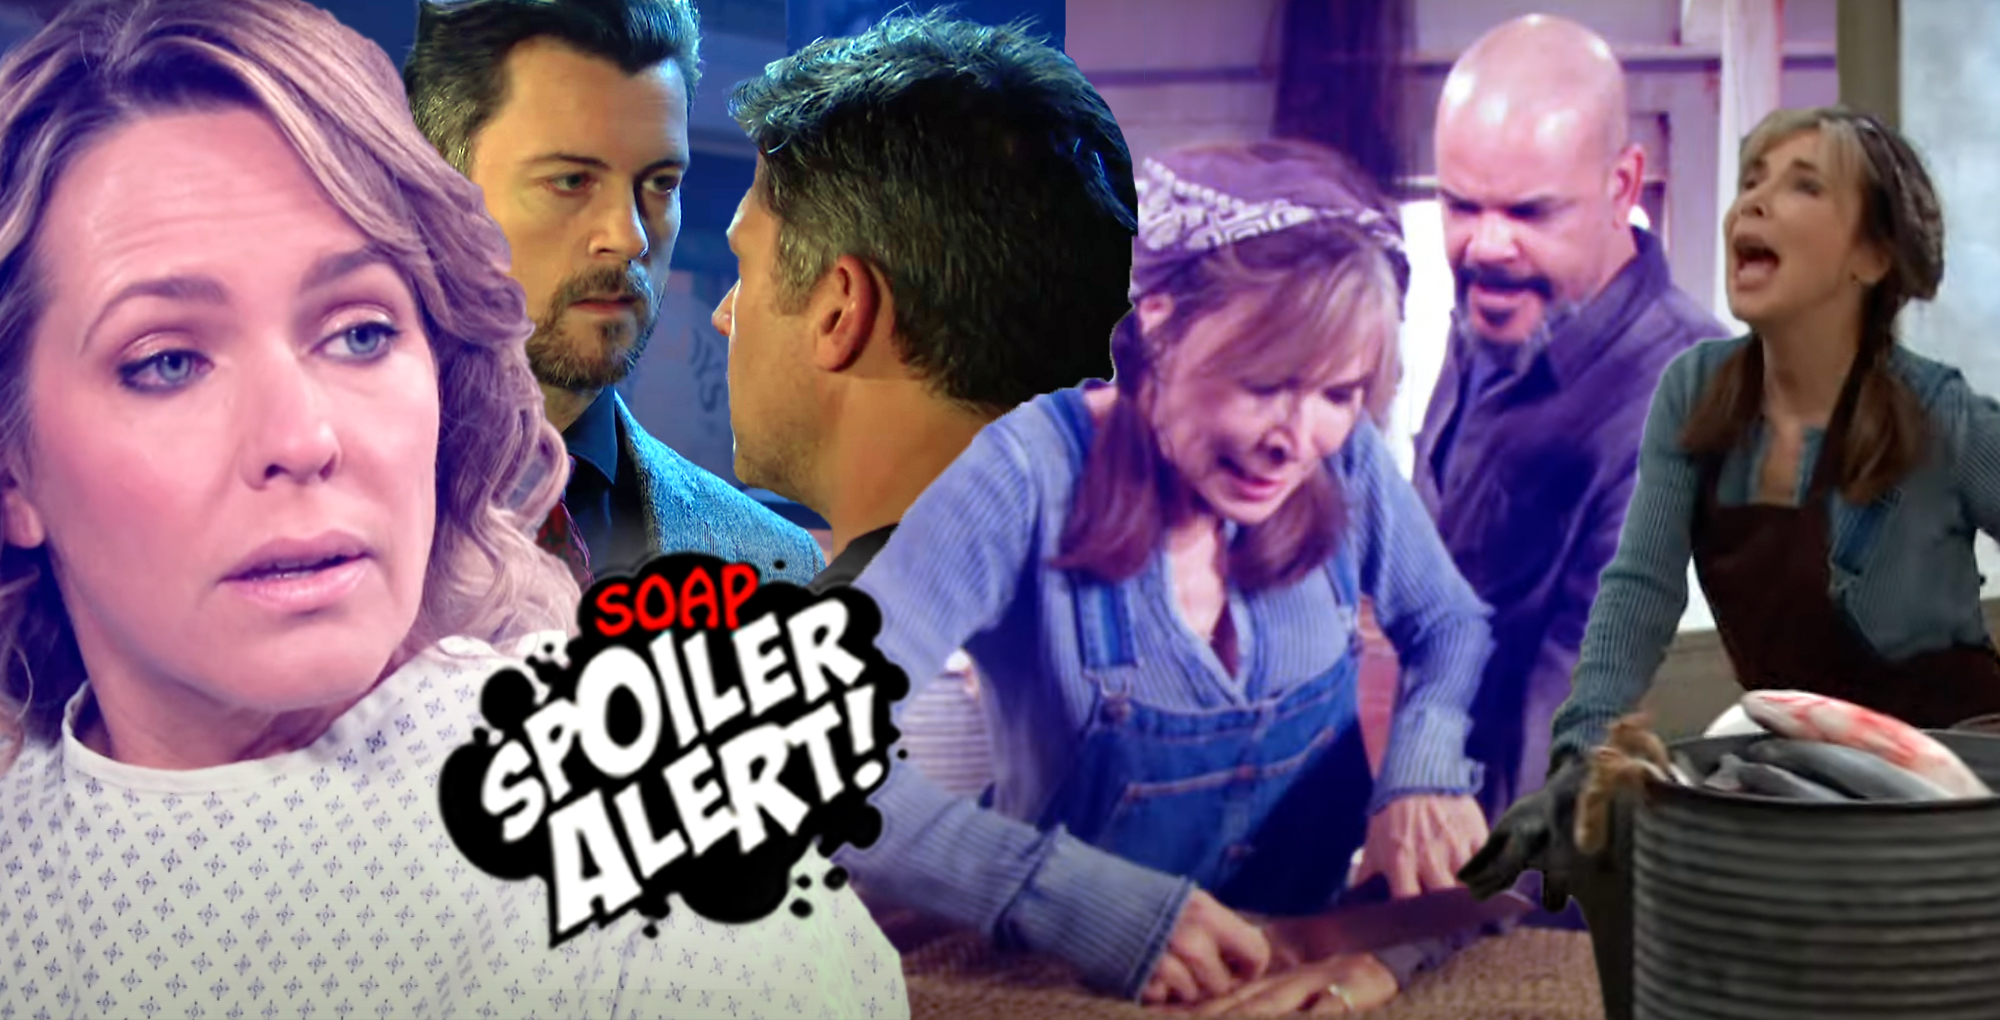 days spoilers video collage of nicole at the hospital, eric and ej, kate with a knife on a man's hand, and kate yelling.